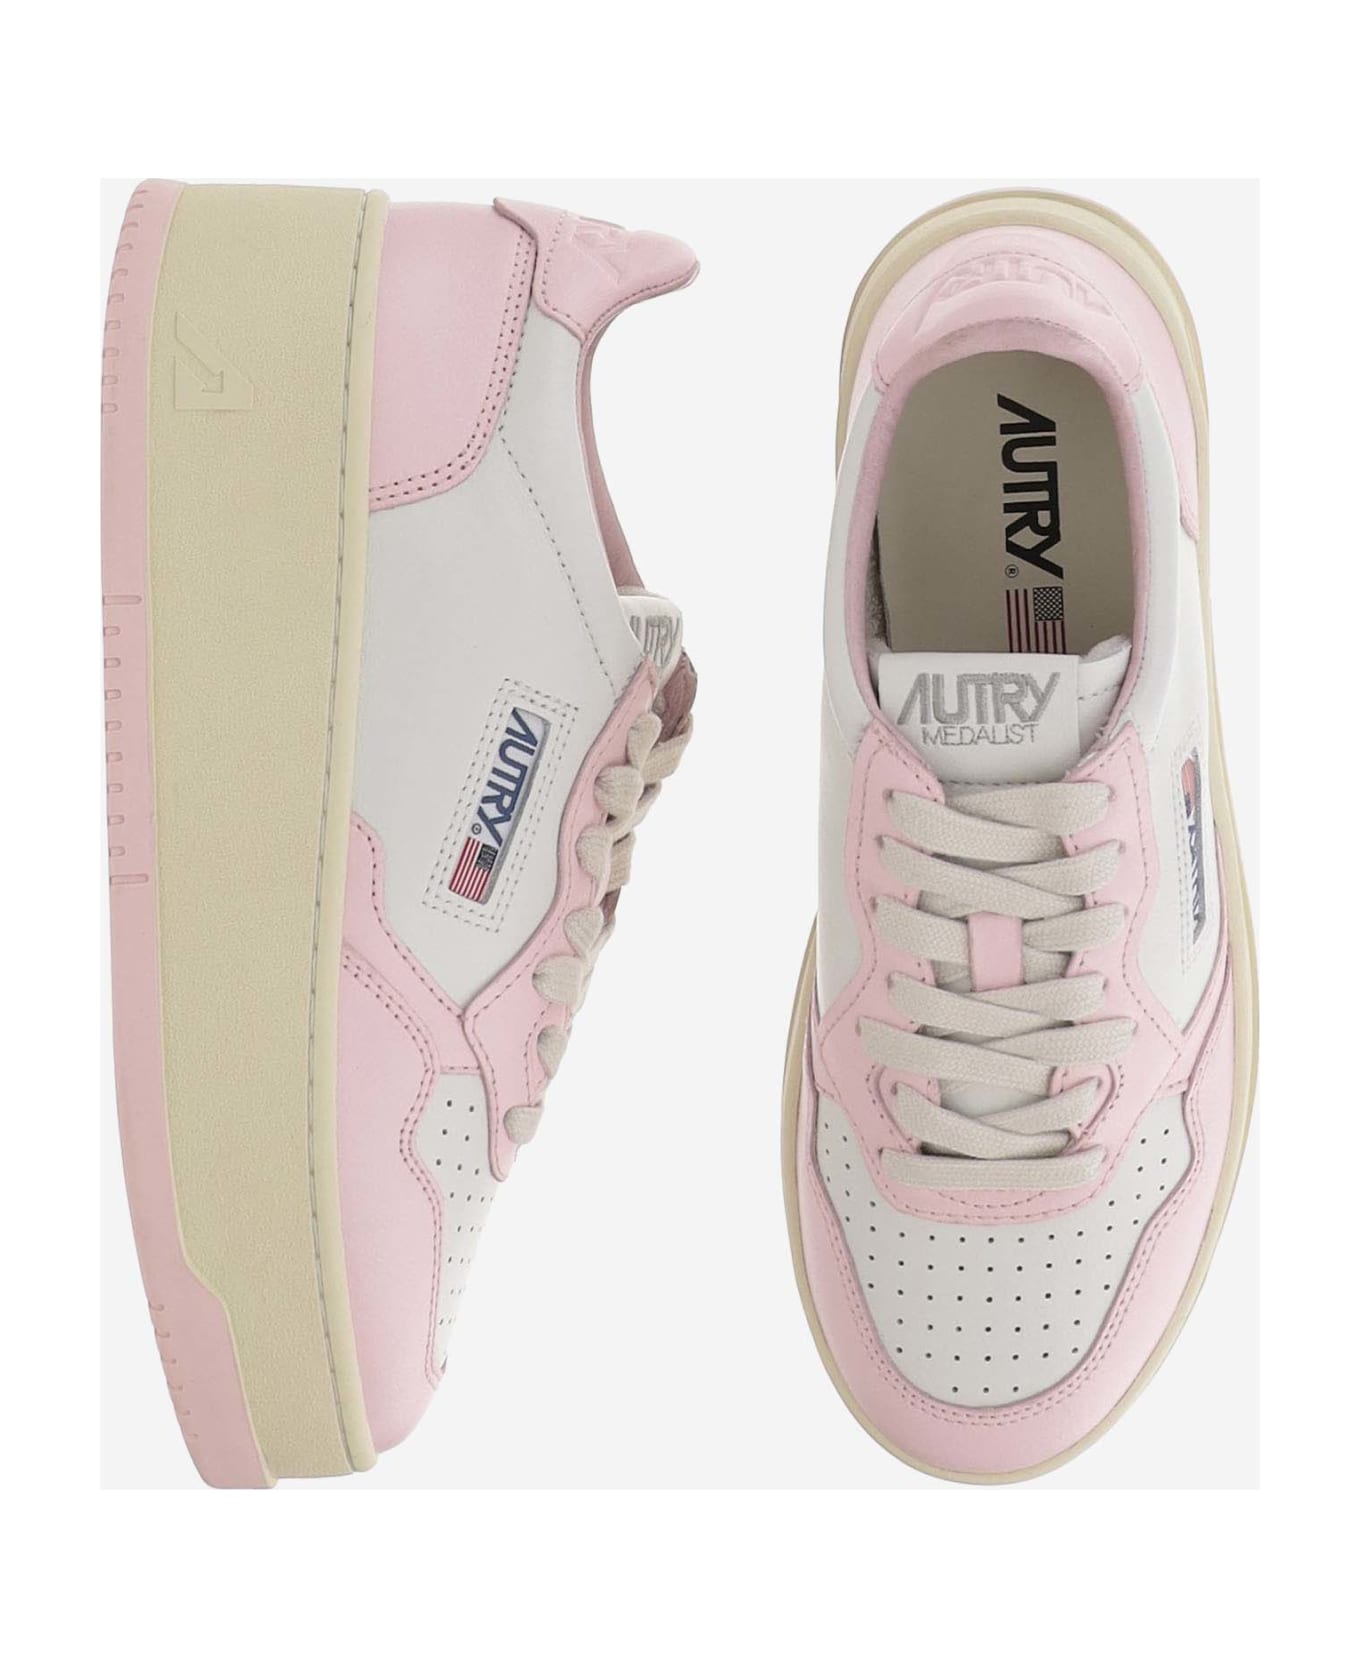 Autry Medalist Platform Low Leather Sneakers - Pink